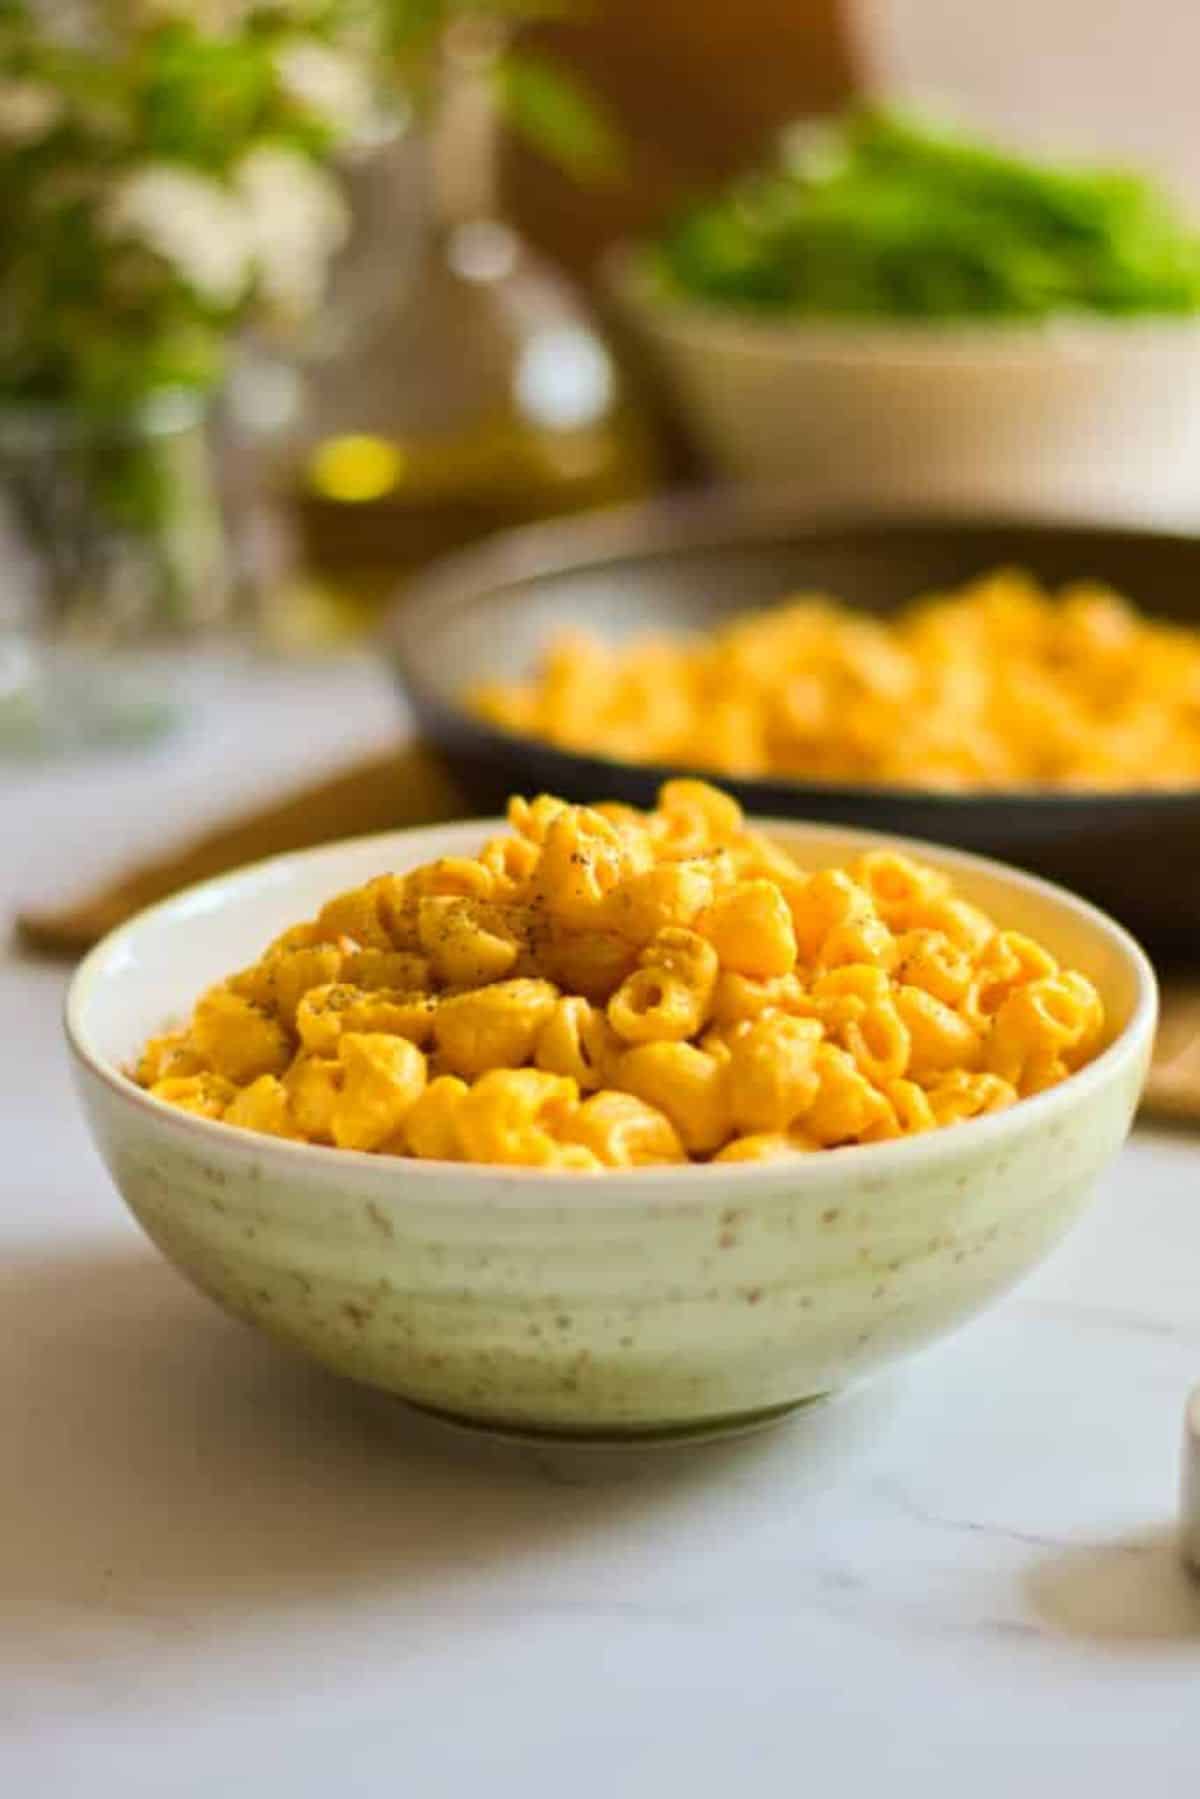 Gluten-free Vegan Mac and Cheese with Potatoes and Carrots in a green bowl.